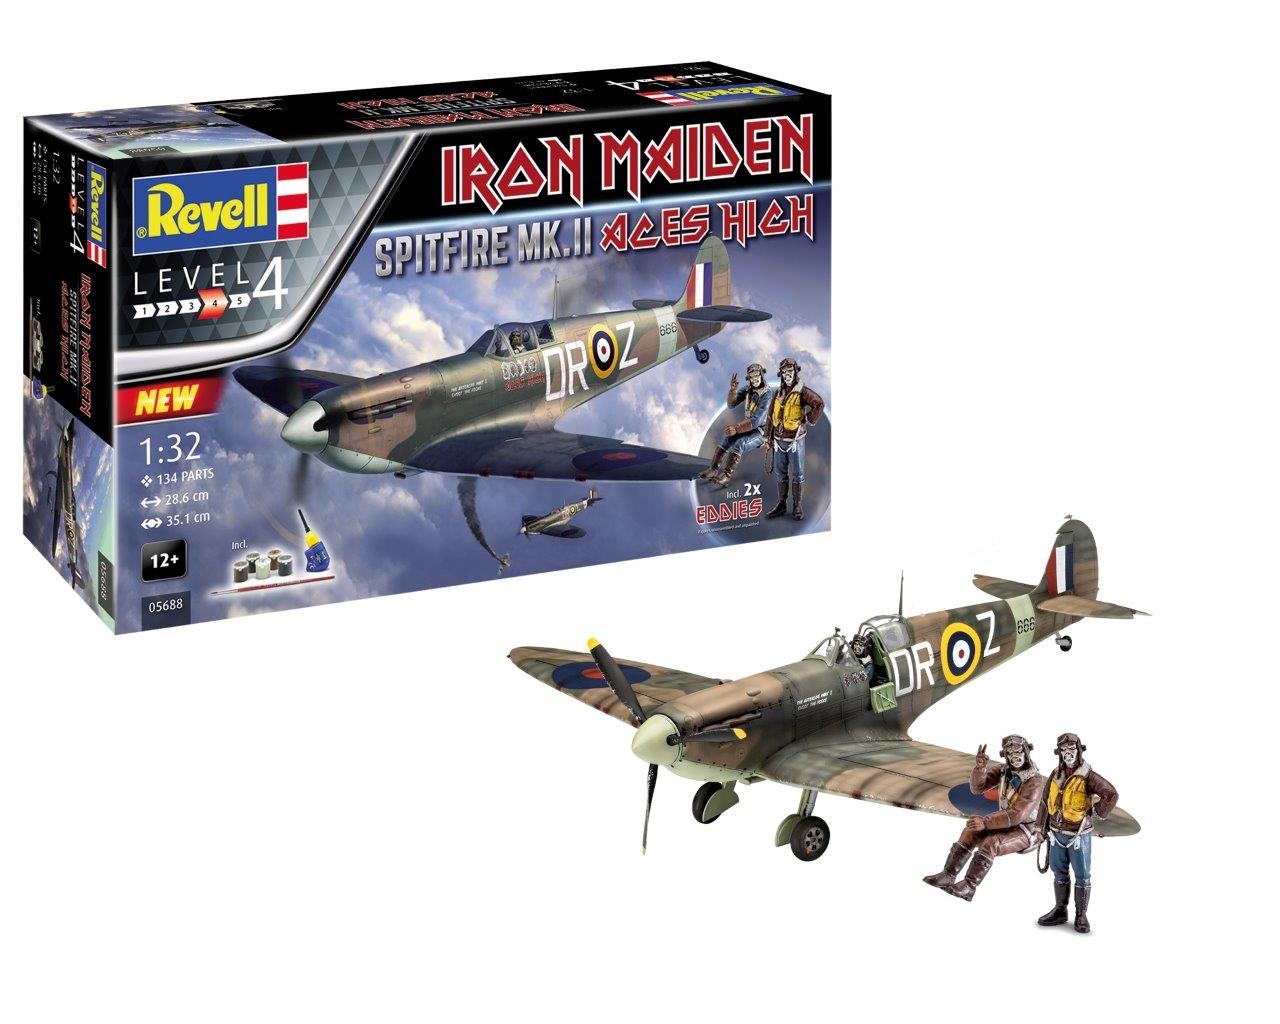 Revell 5688 - SPITFIRE MK.II"ACES HIGH"IRON